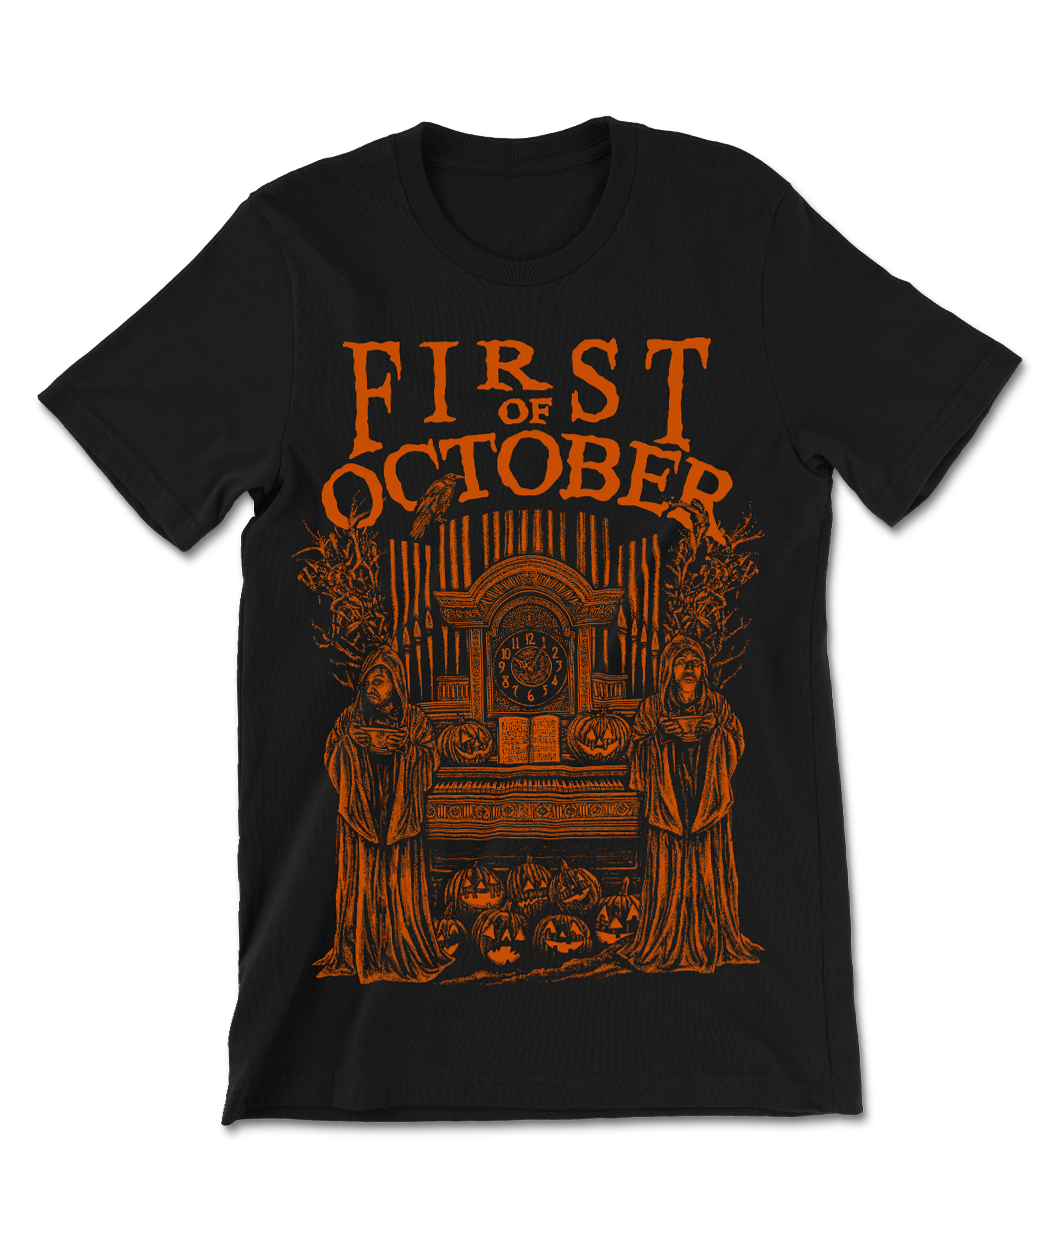 A black t-shirt with orange text that reads "First of October" and has a spooky orange illustration.